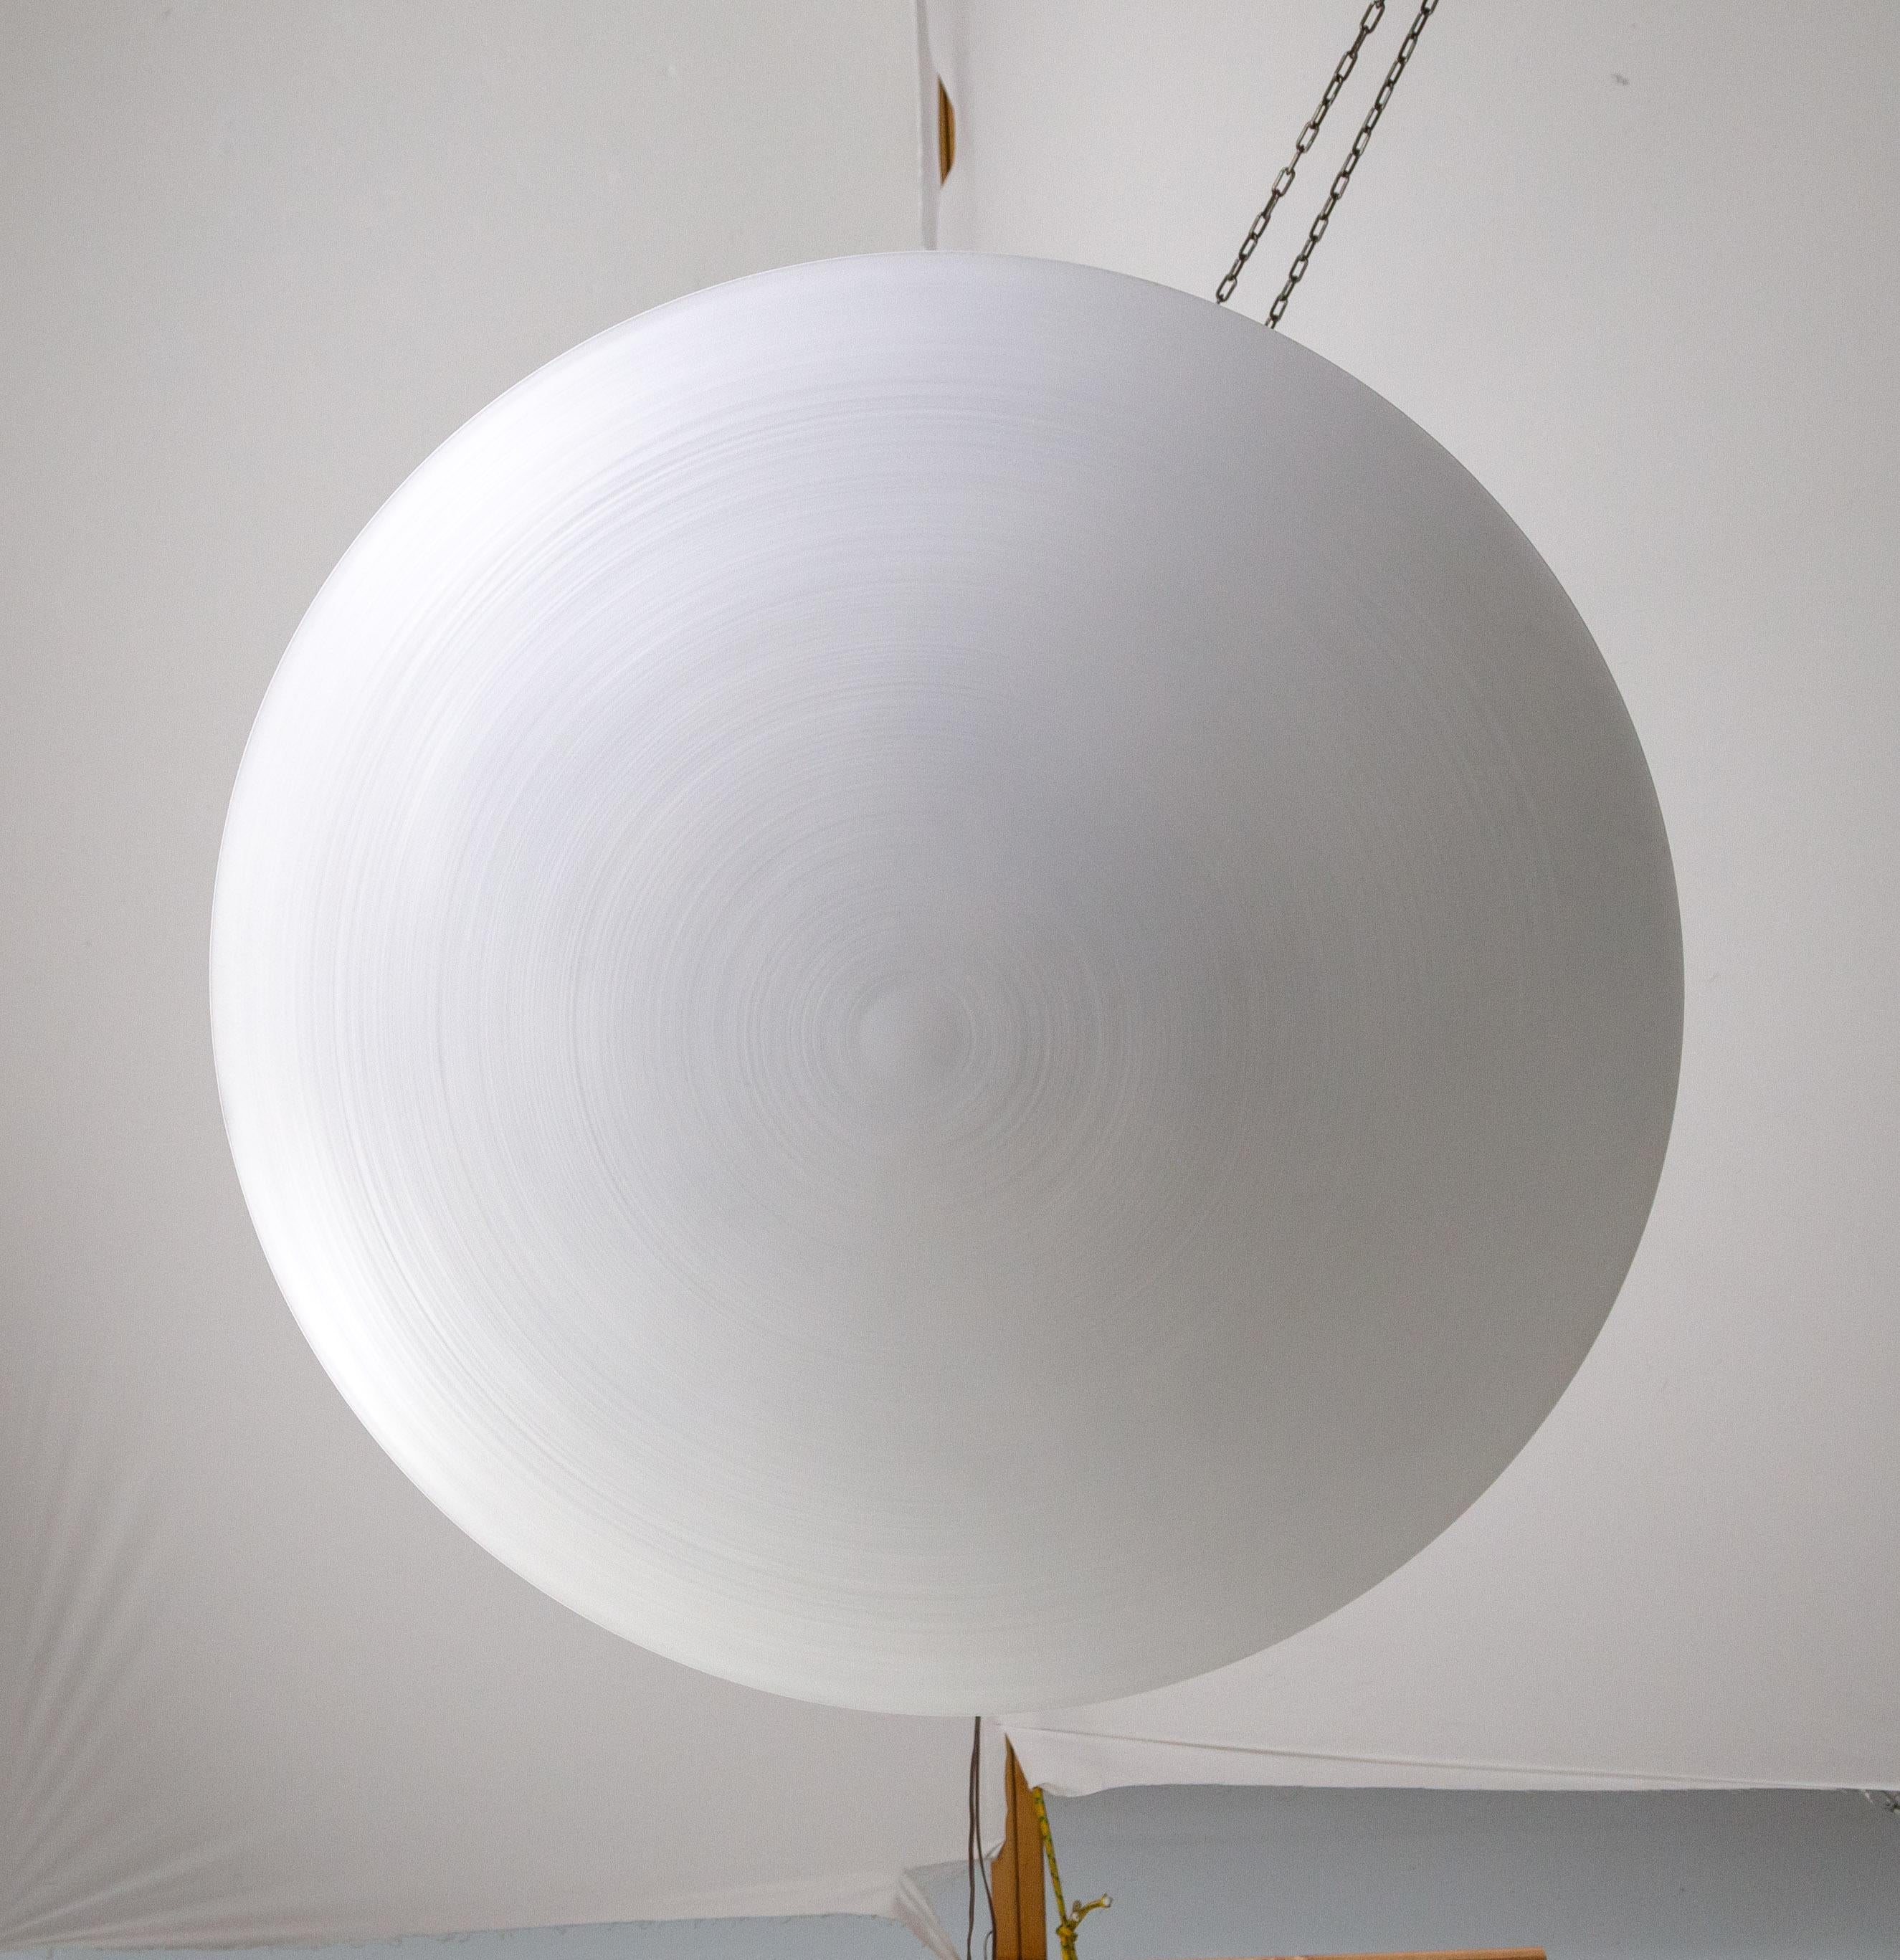 A large, matte-white, spun aluminum, convex disk up-light fixture in a minimal, modern design. It hangs roughly 8 inches from the ceiling to cast a pleasing, diffused light. It is versatile and complements many styles. Made in California by Nova